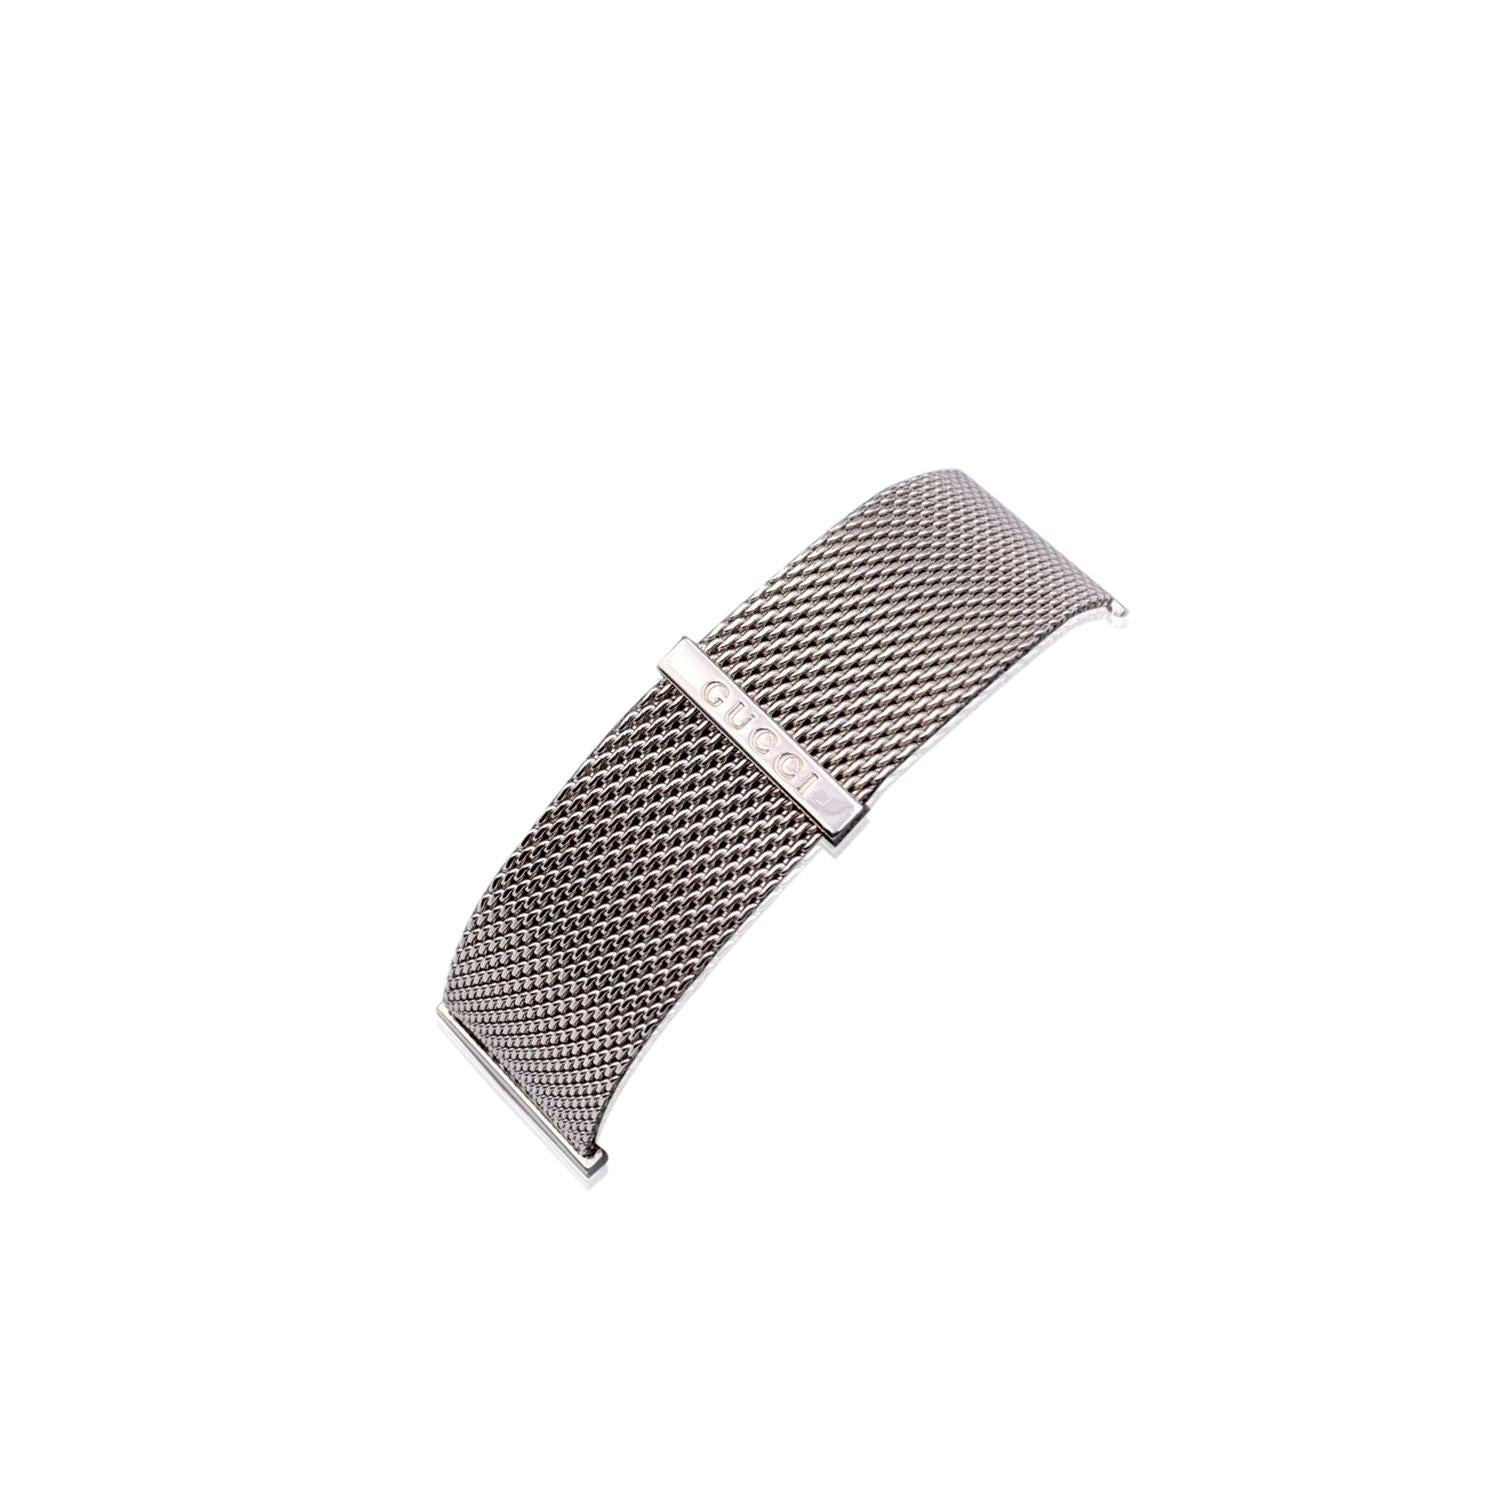 Beautiful metal mesh bracelet by Gucci. Made in 925 sterling silver. 'Gucci - Made in Italy' and '925' hallmark engraved on the bracelet. Total lenght: 6.5 inches - 16.5 cm. Width: 0.75 inches - 2 cm Condition A - EXCELLENT Gently used. Please, look